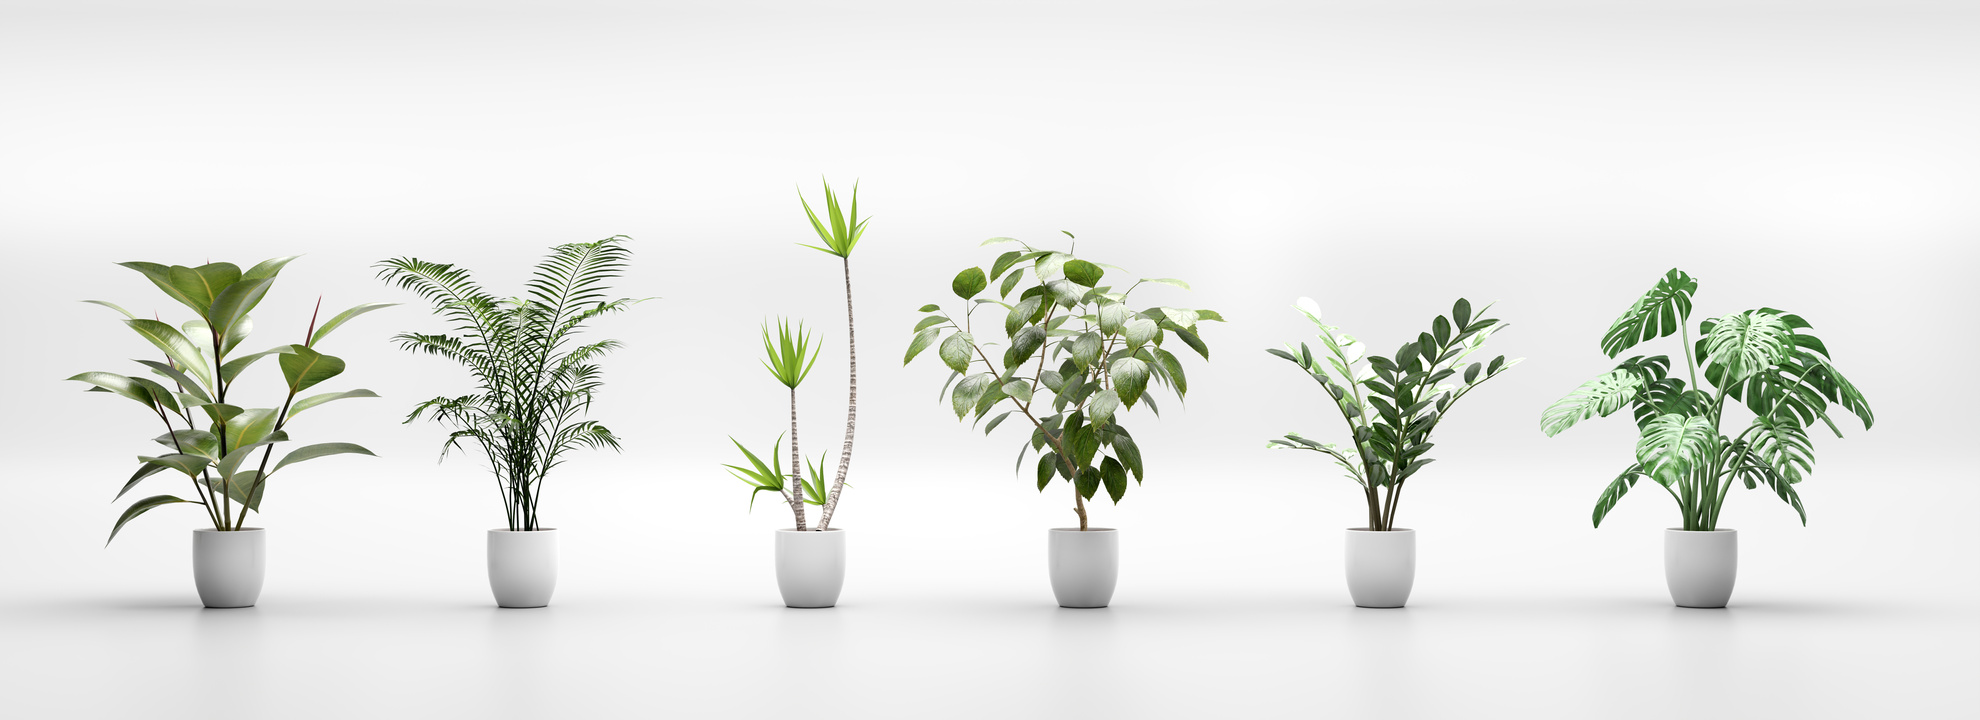 Set of Tropical Green Plants in Pots. Home Decoration Assets